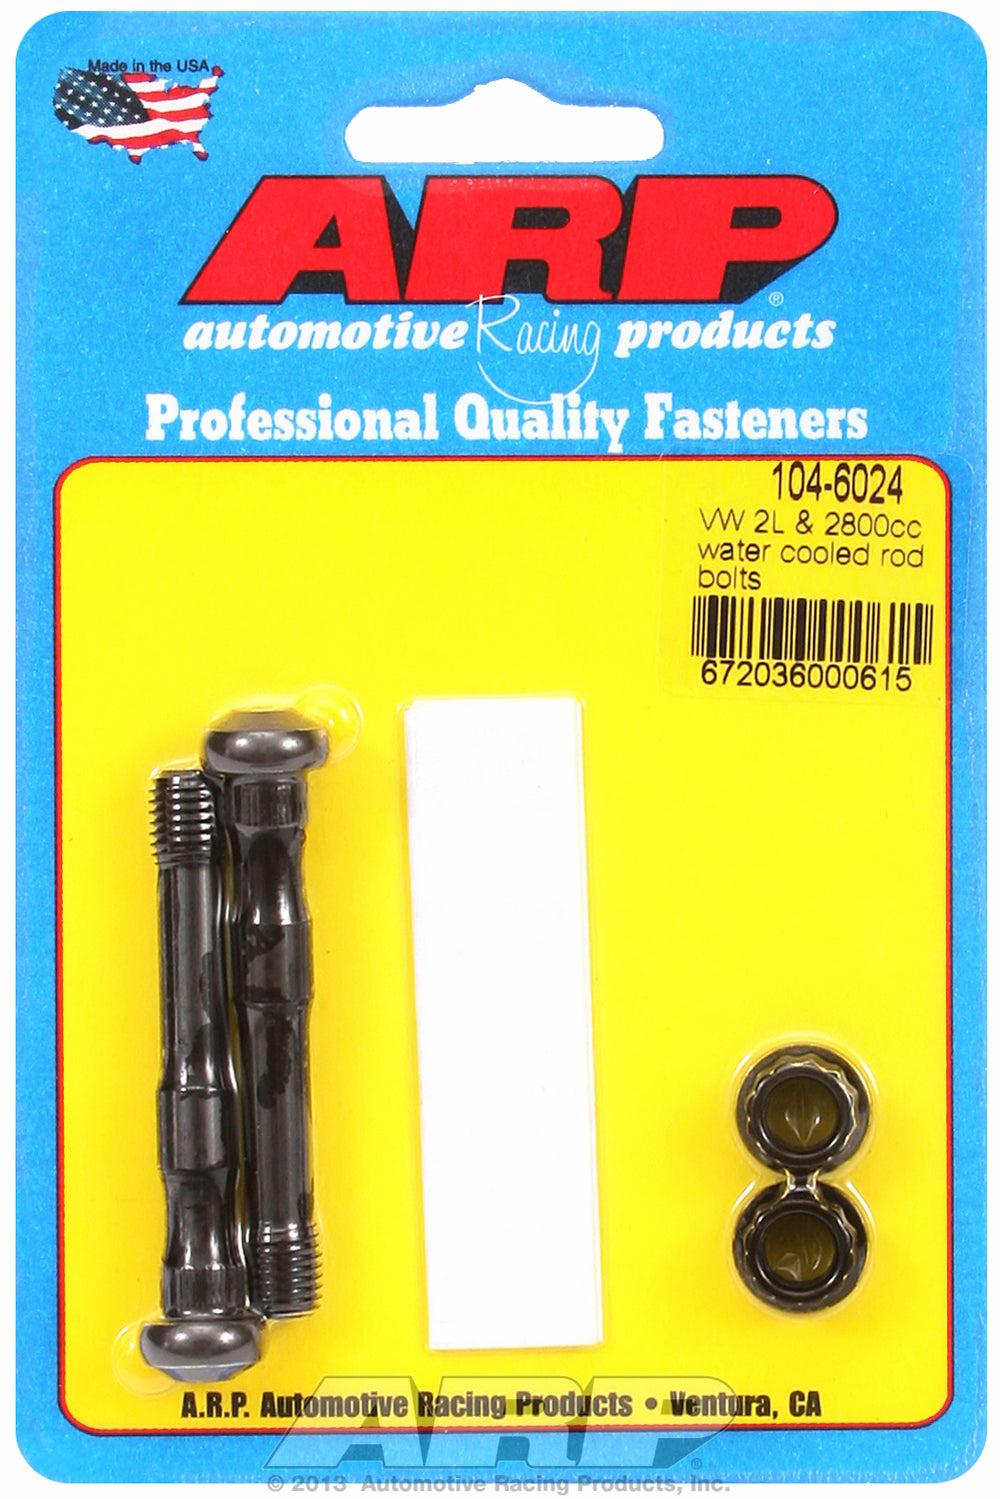 Pro Series ARP2000 2-pc Rod Bolt Kit for Volkswagen/Audi 1.8L & 2.0L water cooled